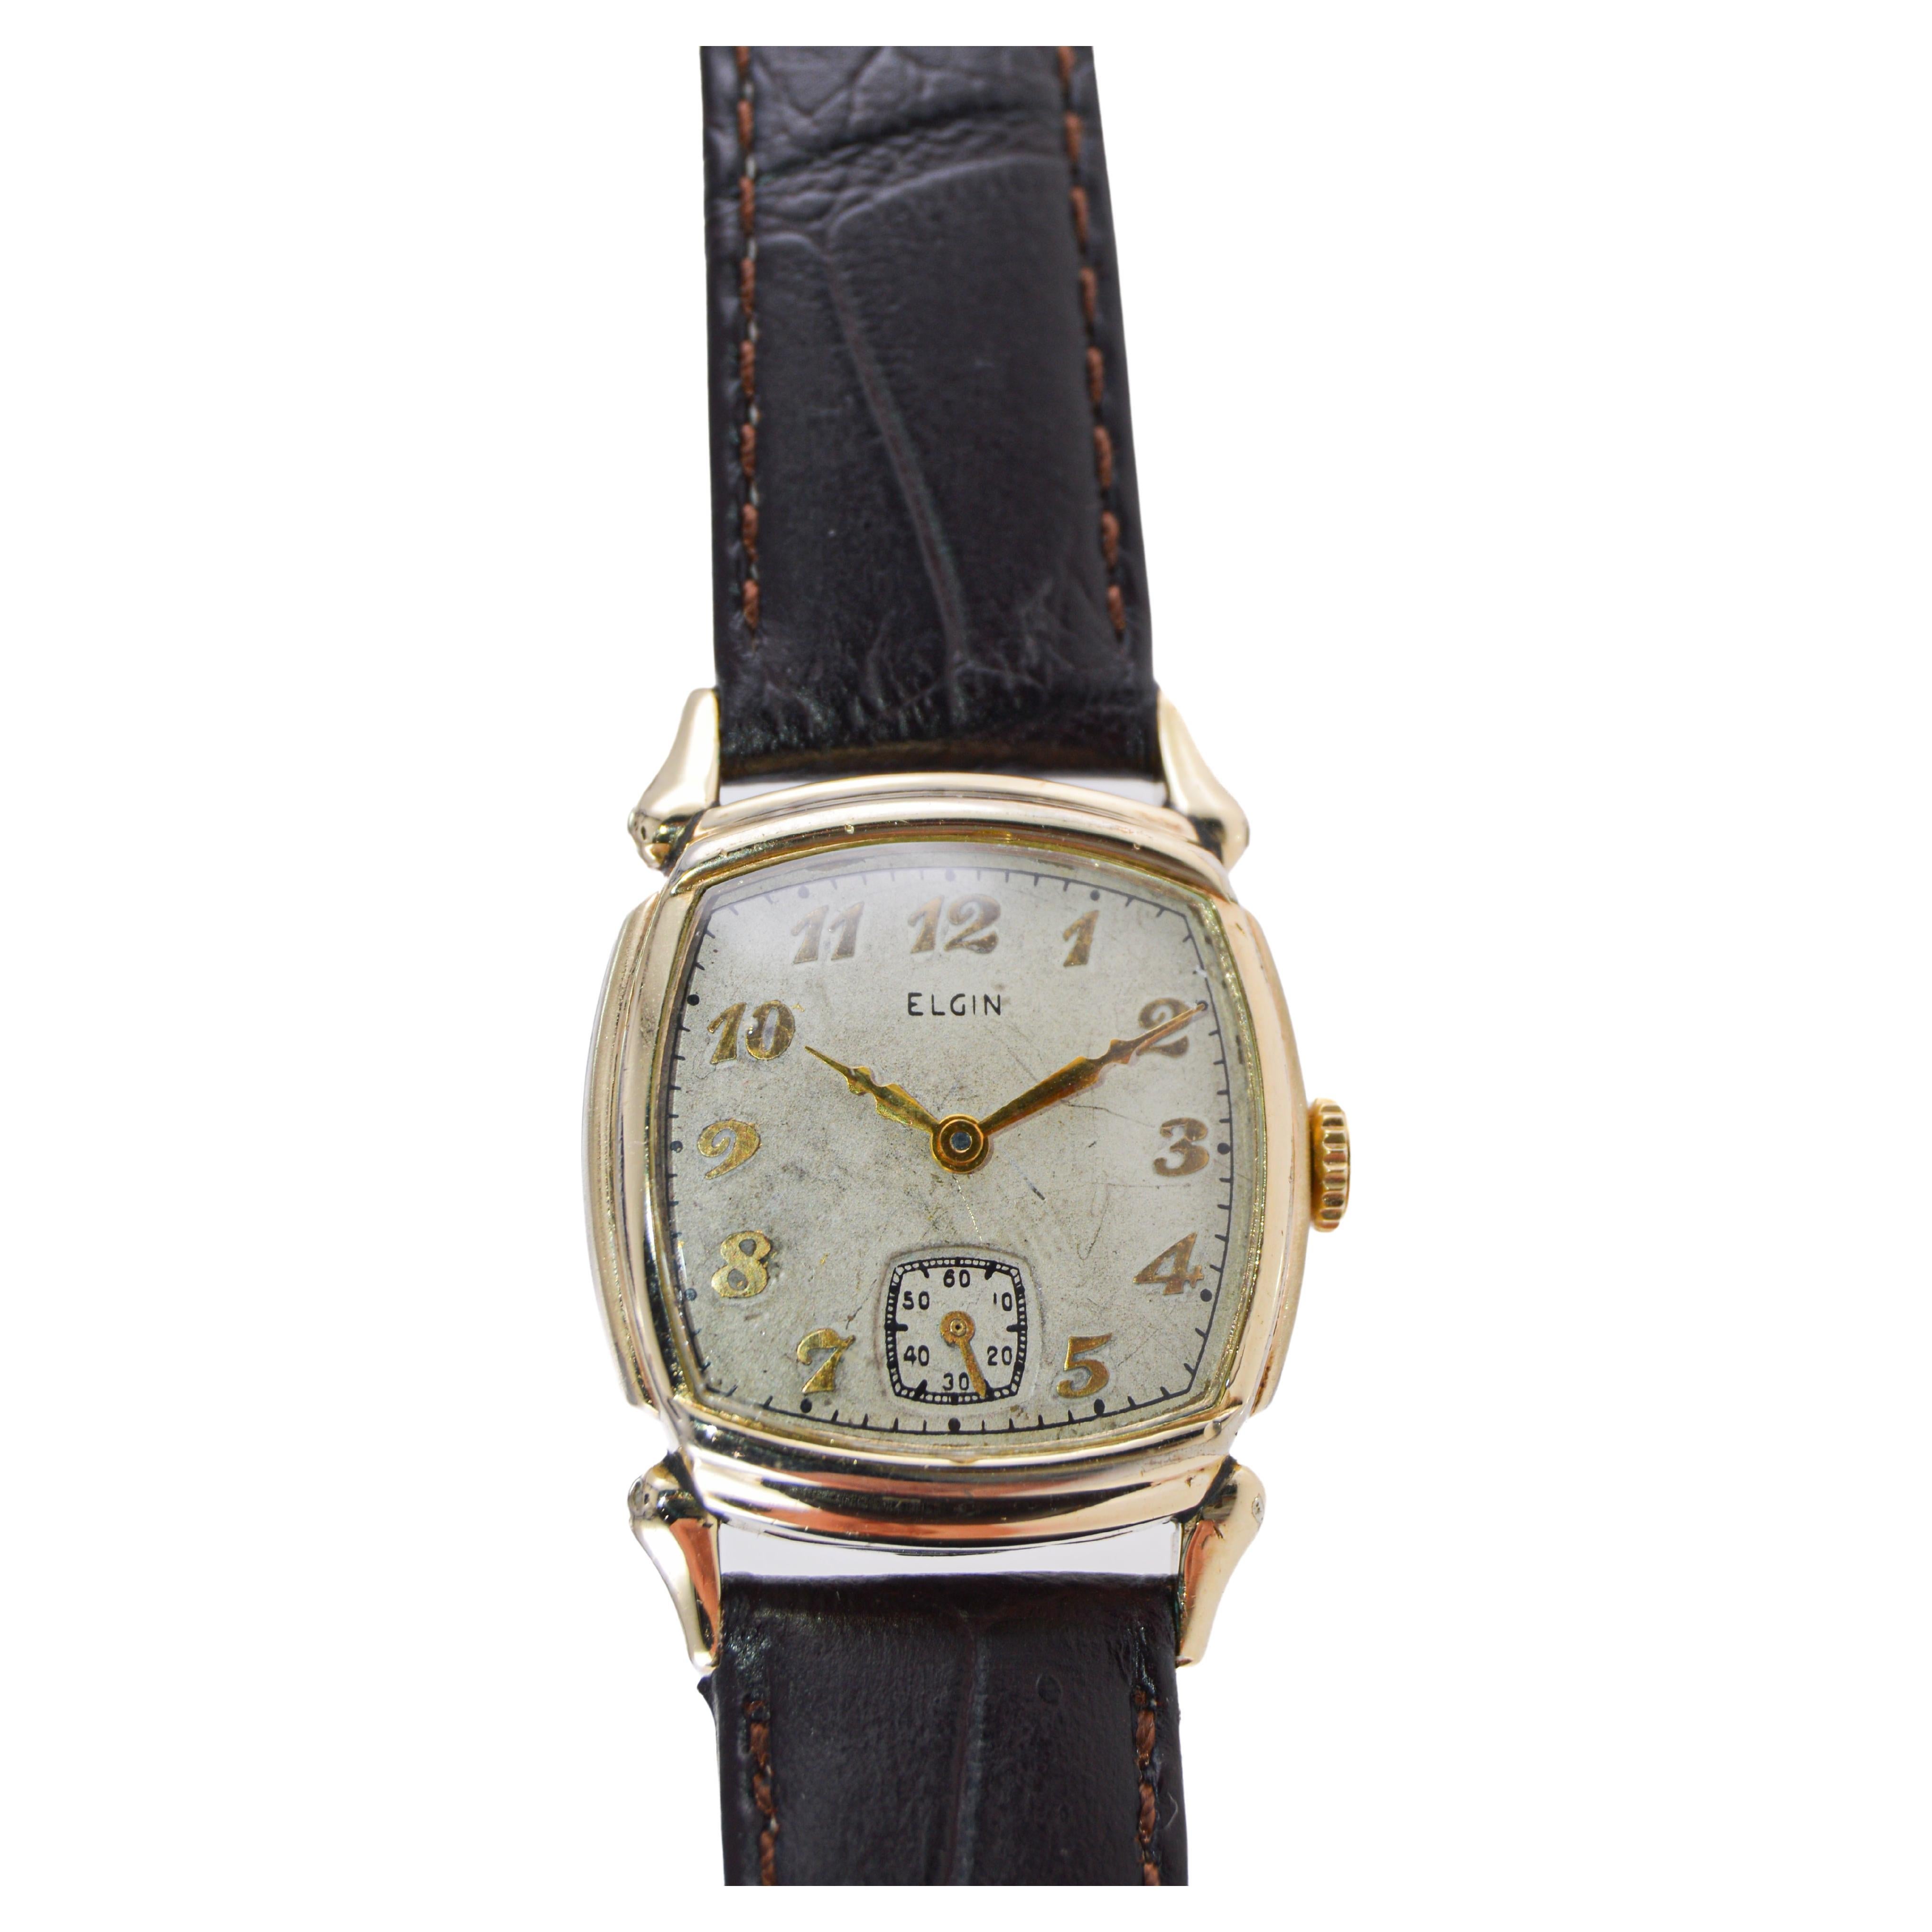 Elgin Gold Filled Art Deco Cushion Shaped American Watch with Original Dial 1940 For Sale 1